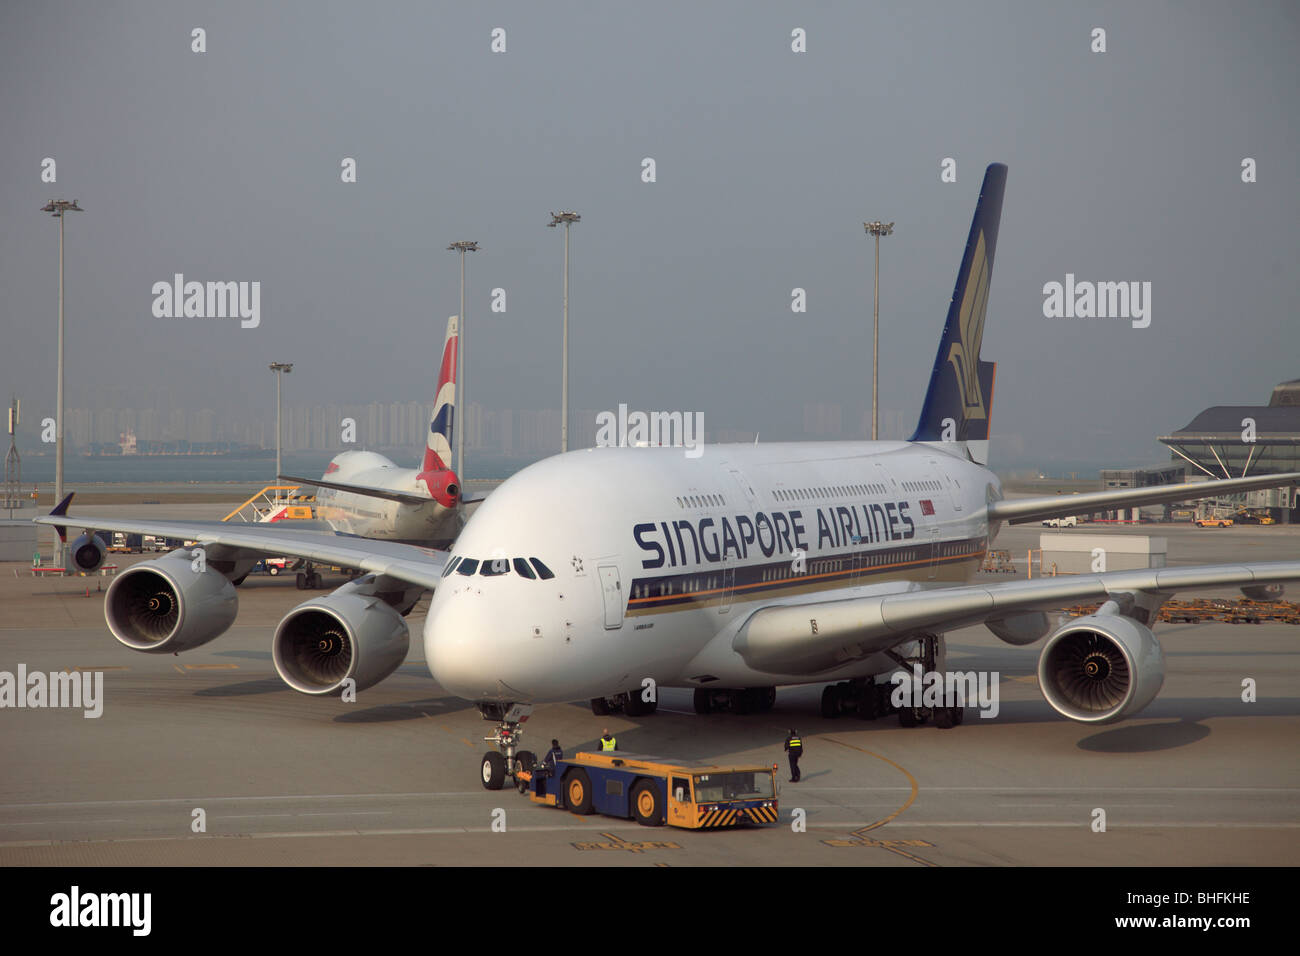 Singapore Airlines Airbus A 380 aereo a getto Foto Stock